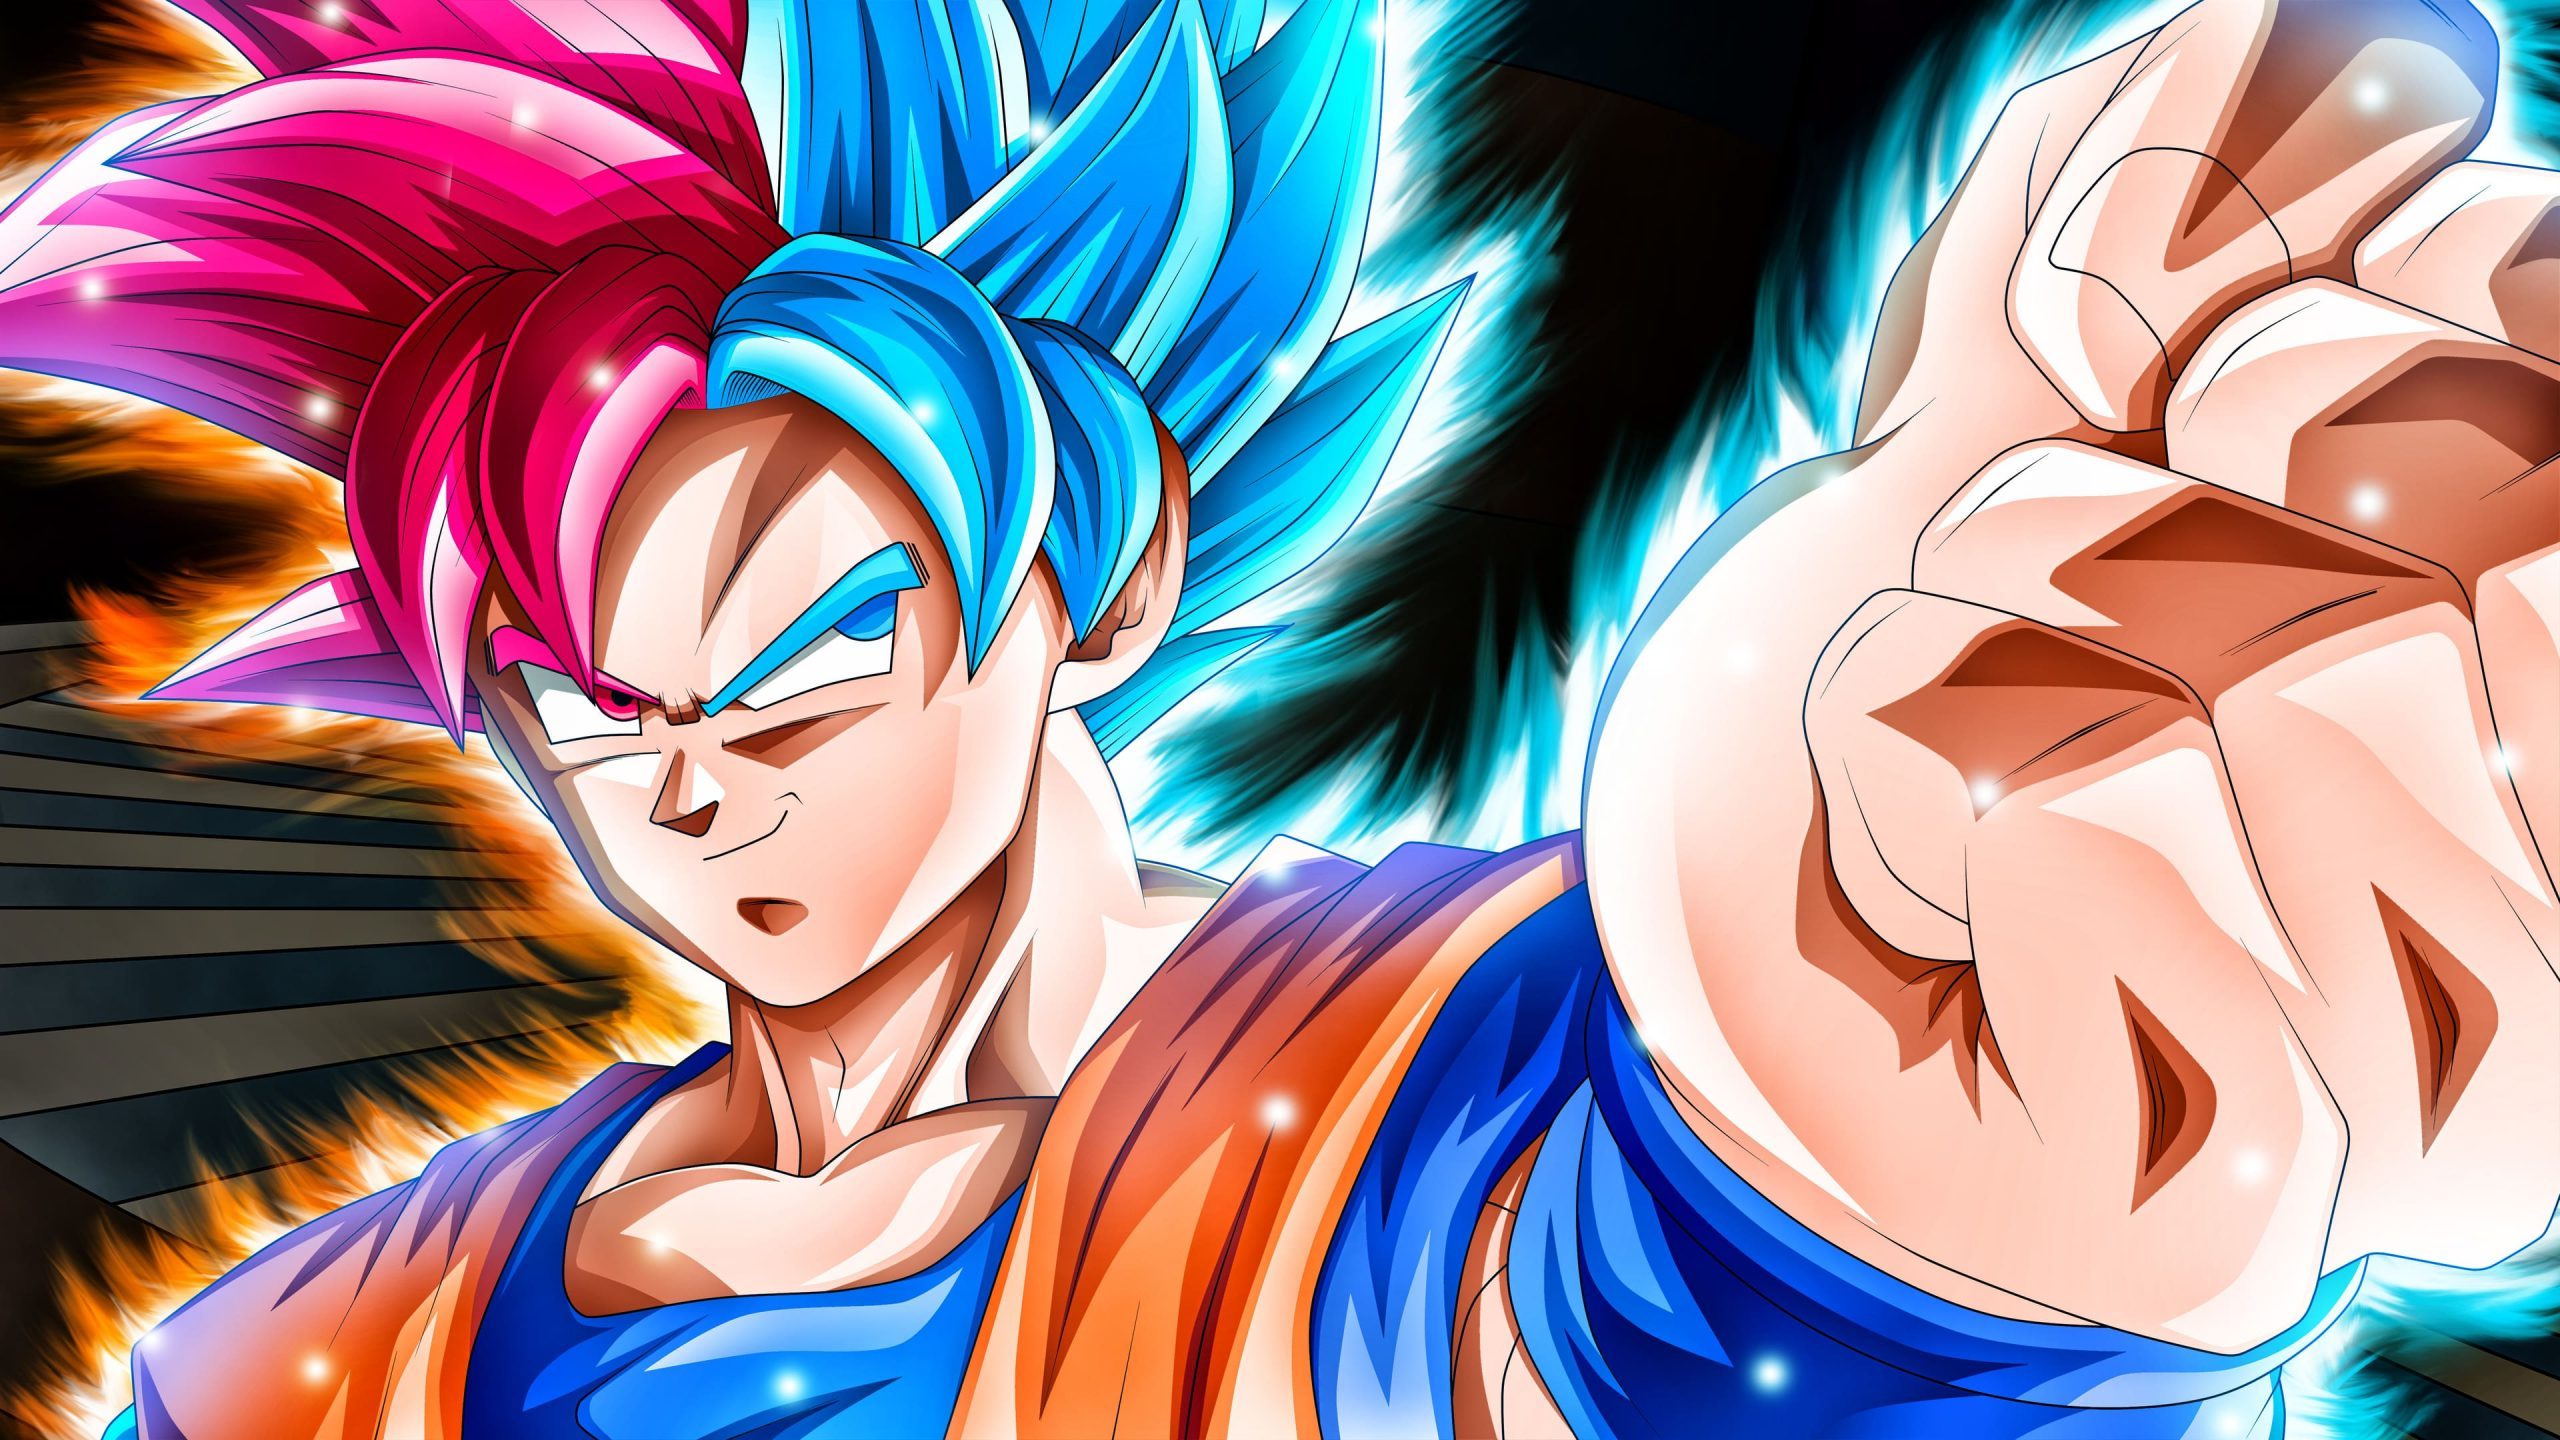 25 Best 4k wallpaper of goku You Can Save It Without A Penny ...